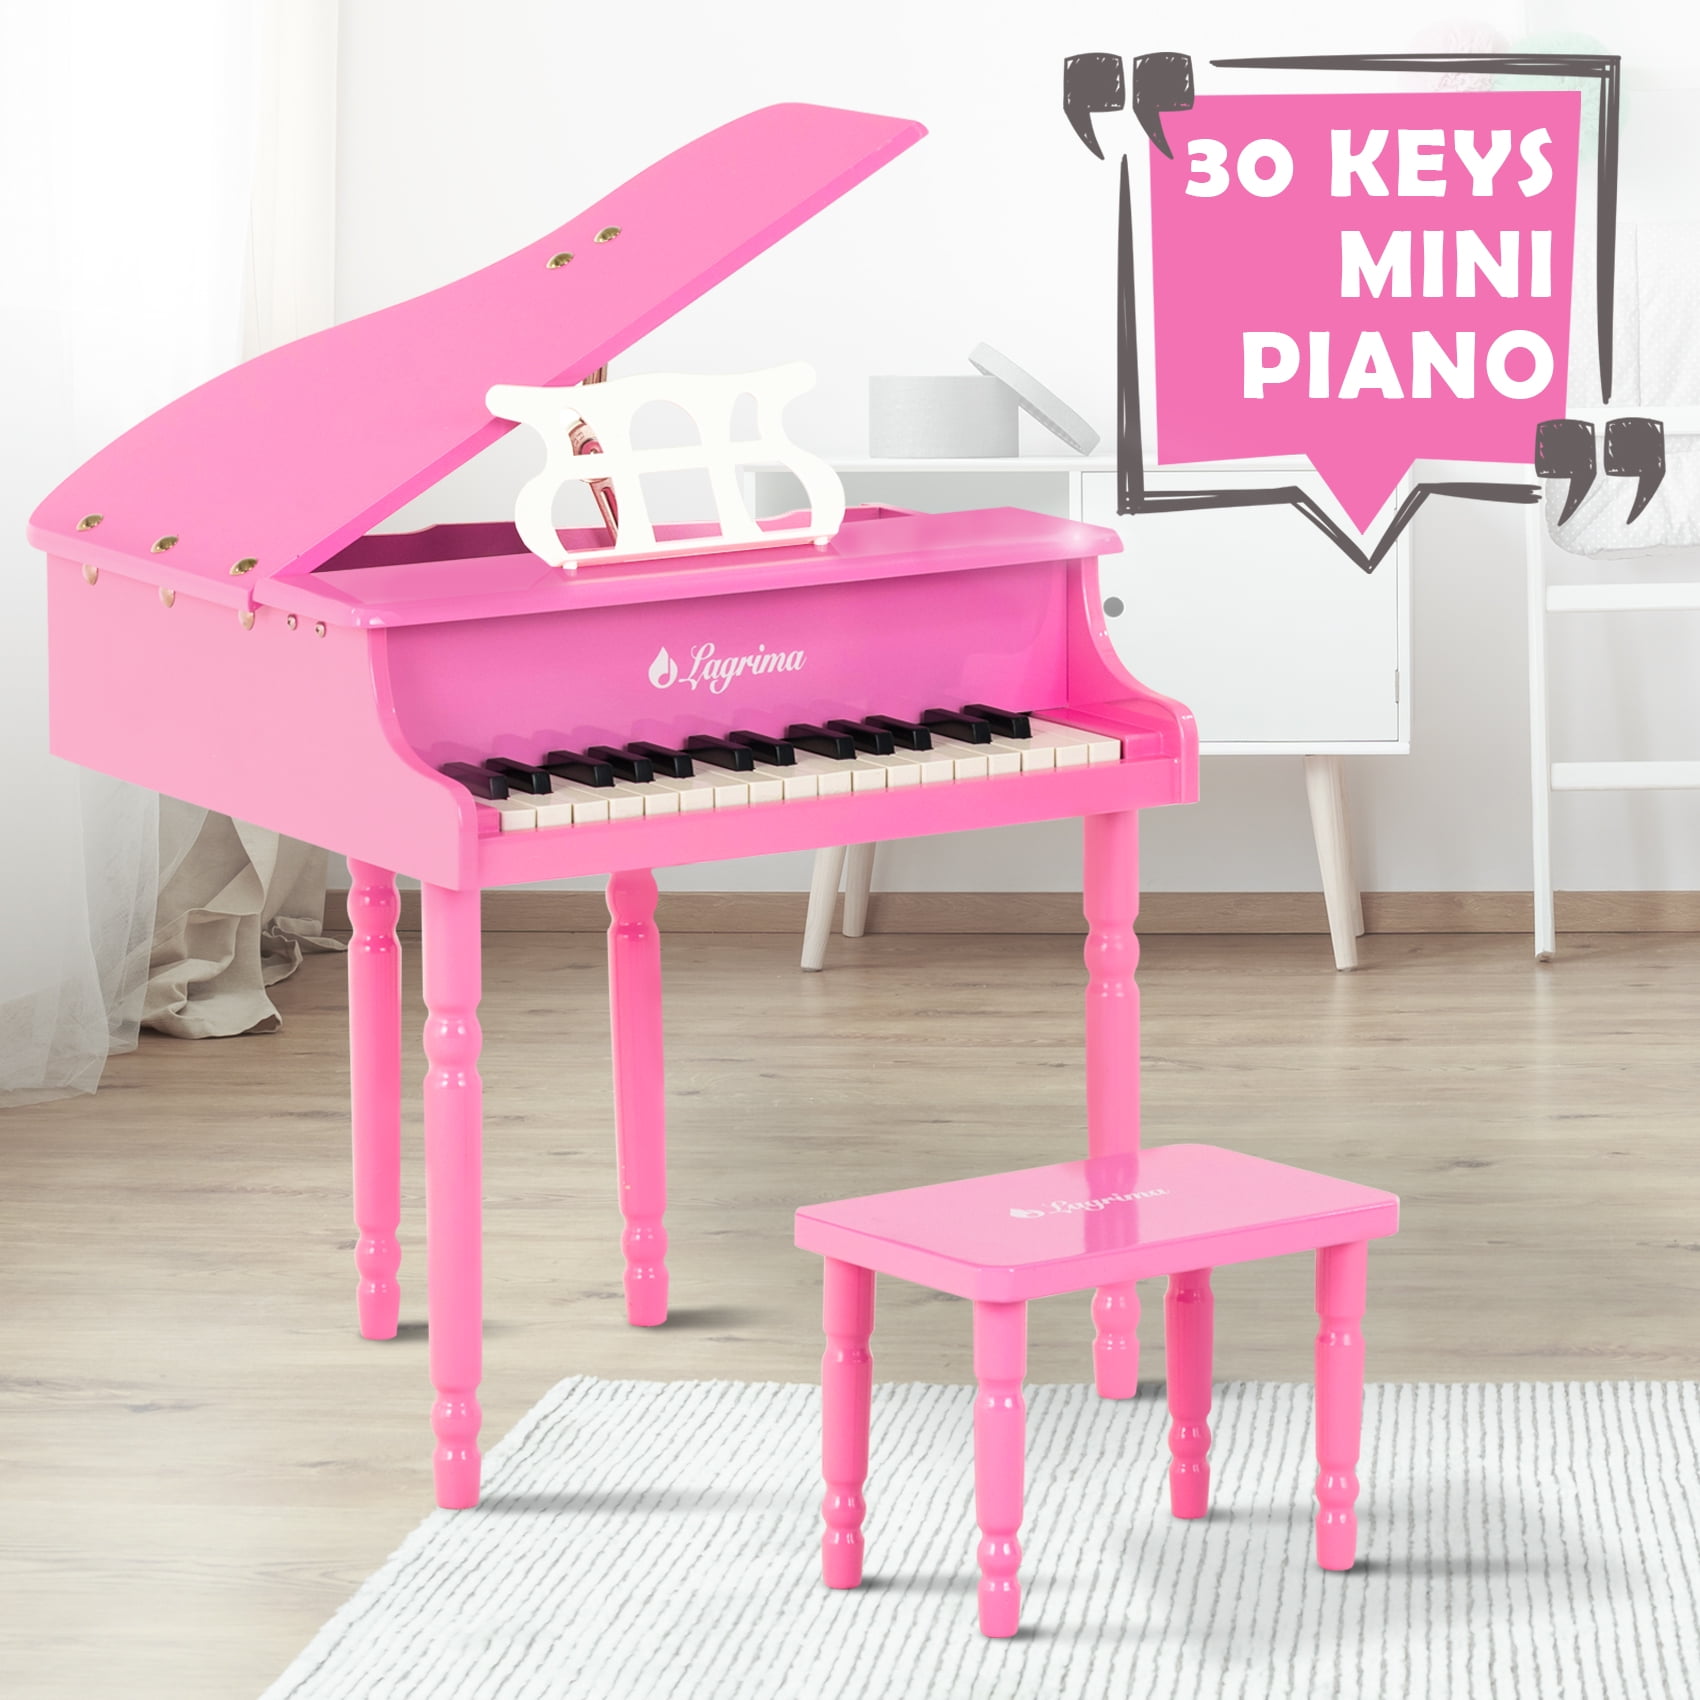 30 Key Electric Kids Mini Piano Children Grand Wood Musical Toy Pink W/Bench 